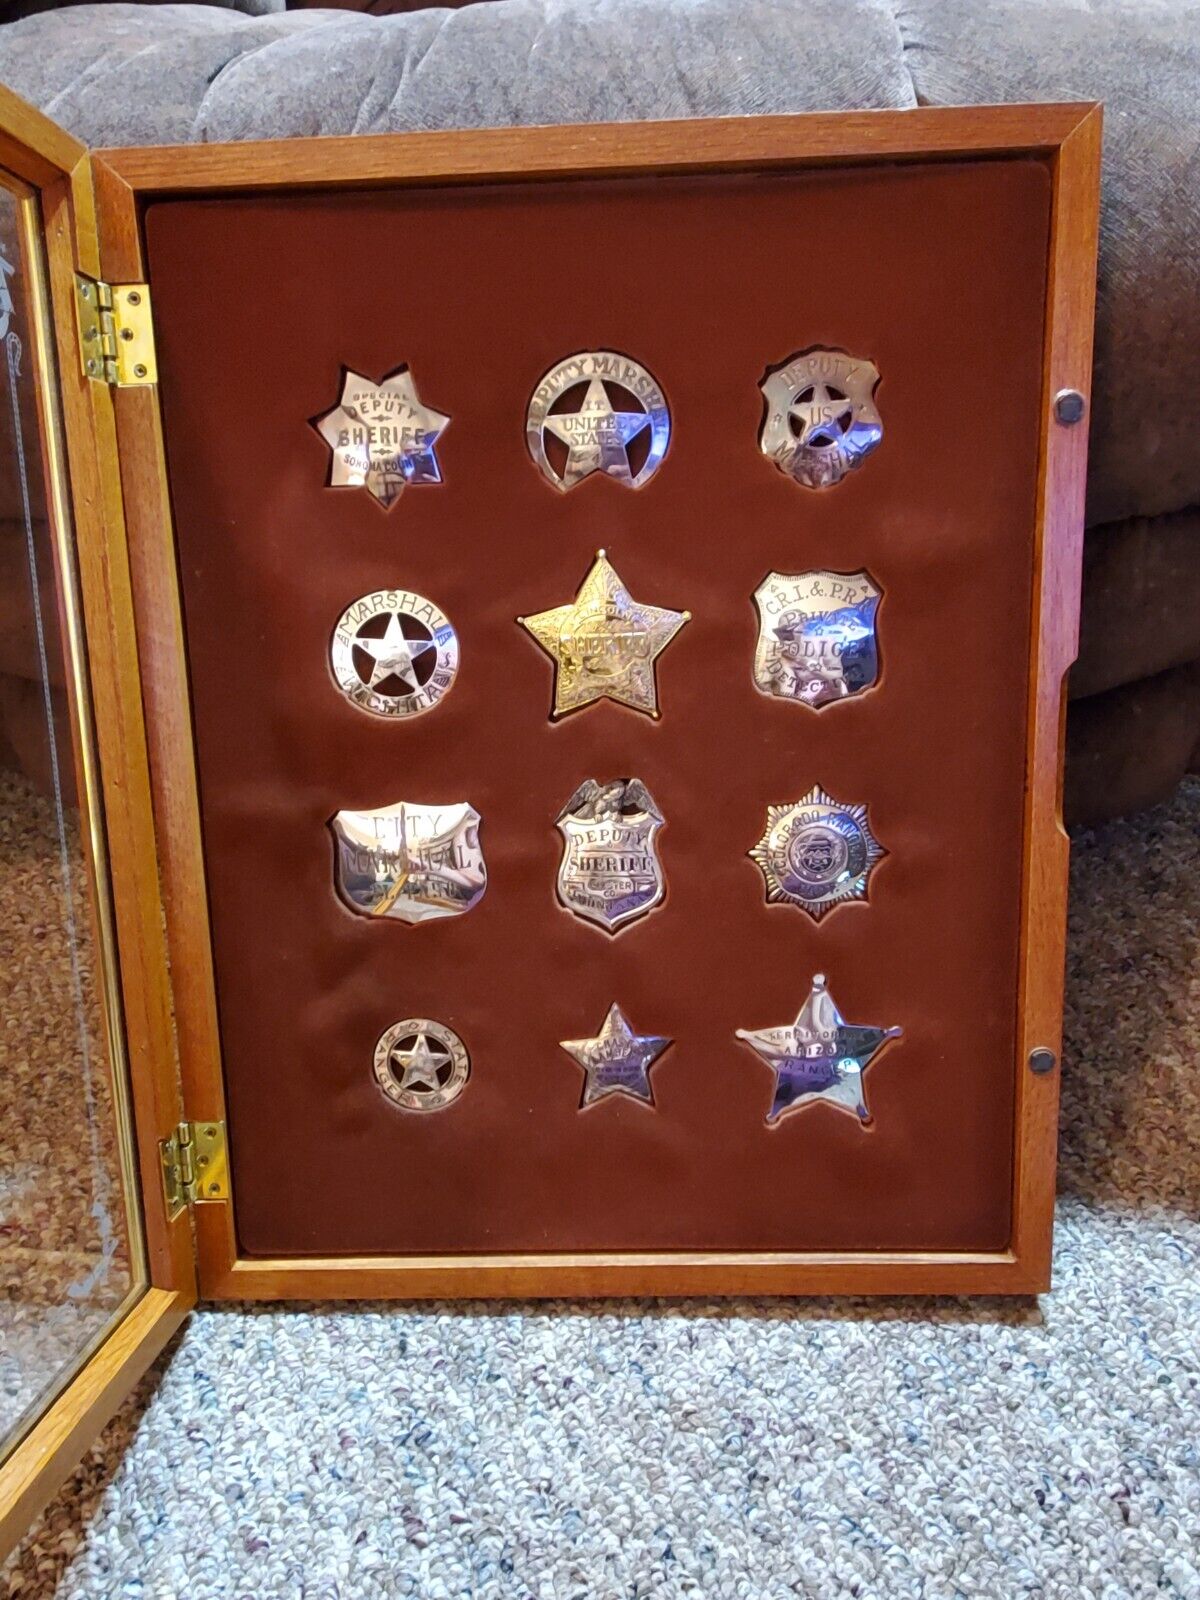 1987 Franklin Mint Collectable Badge Sets with 20x16 wood and glass Storage Case